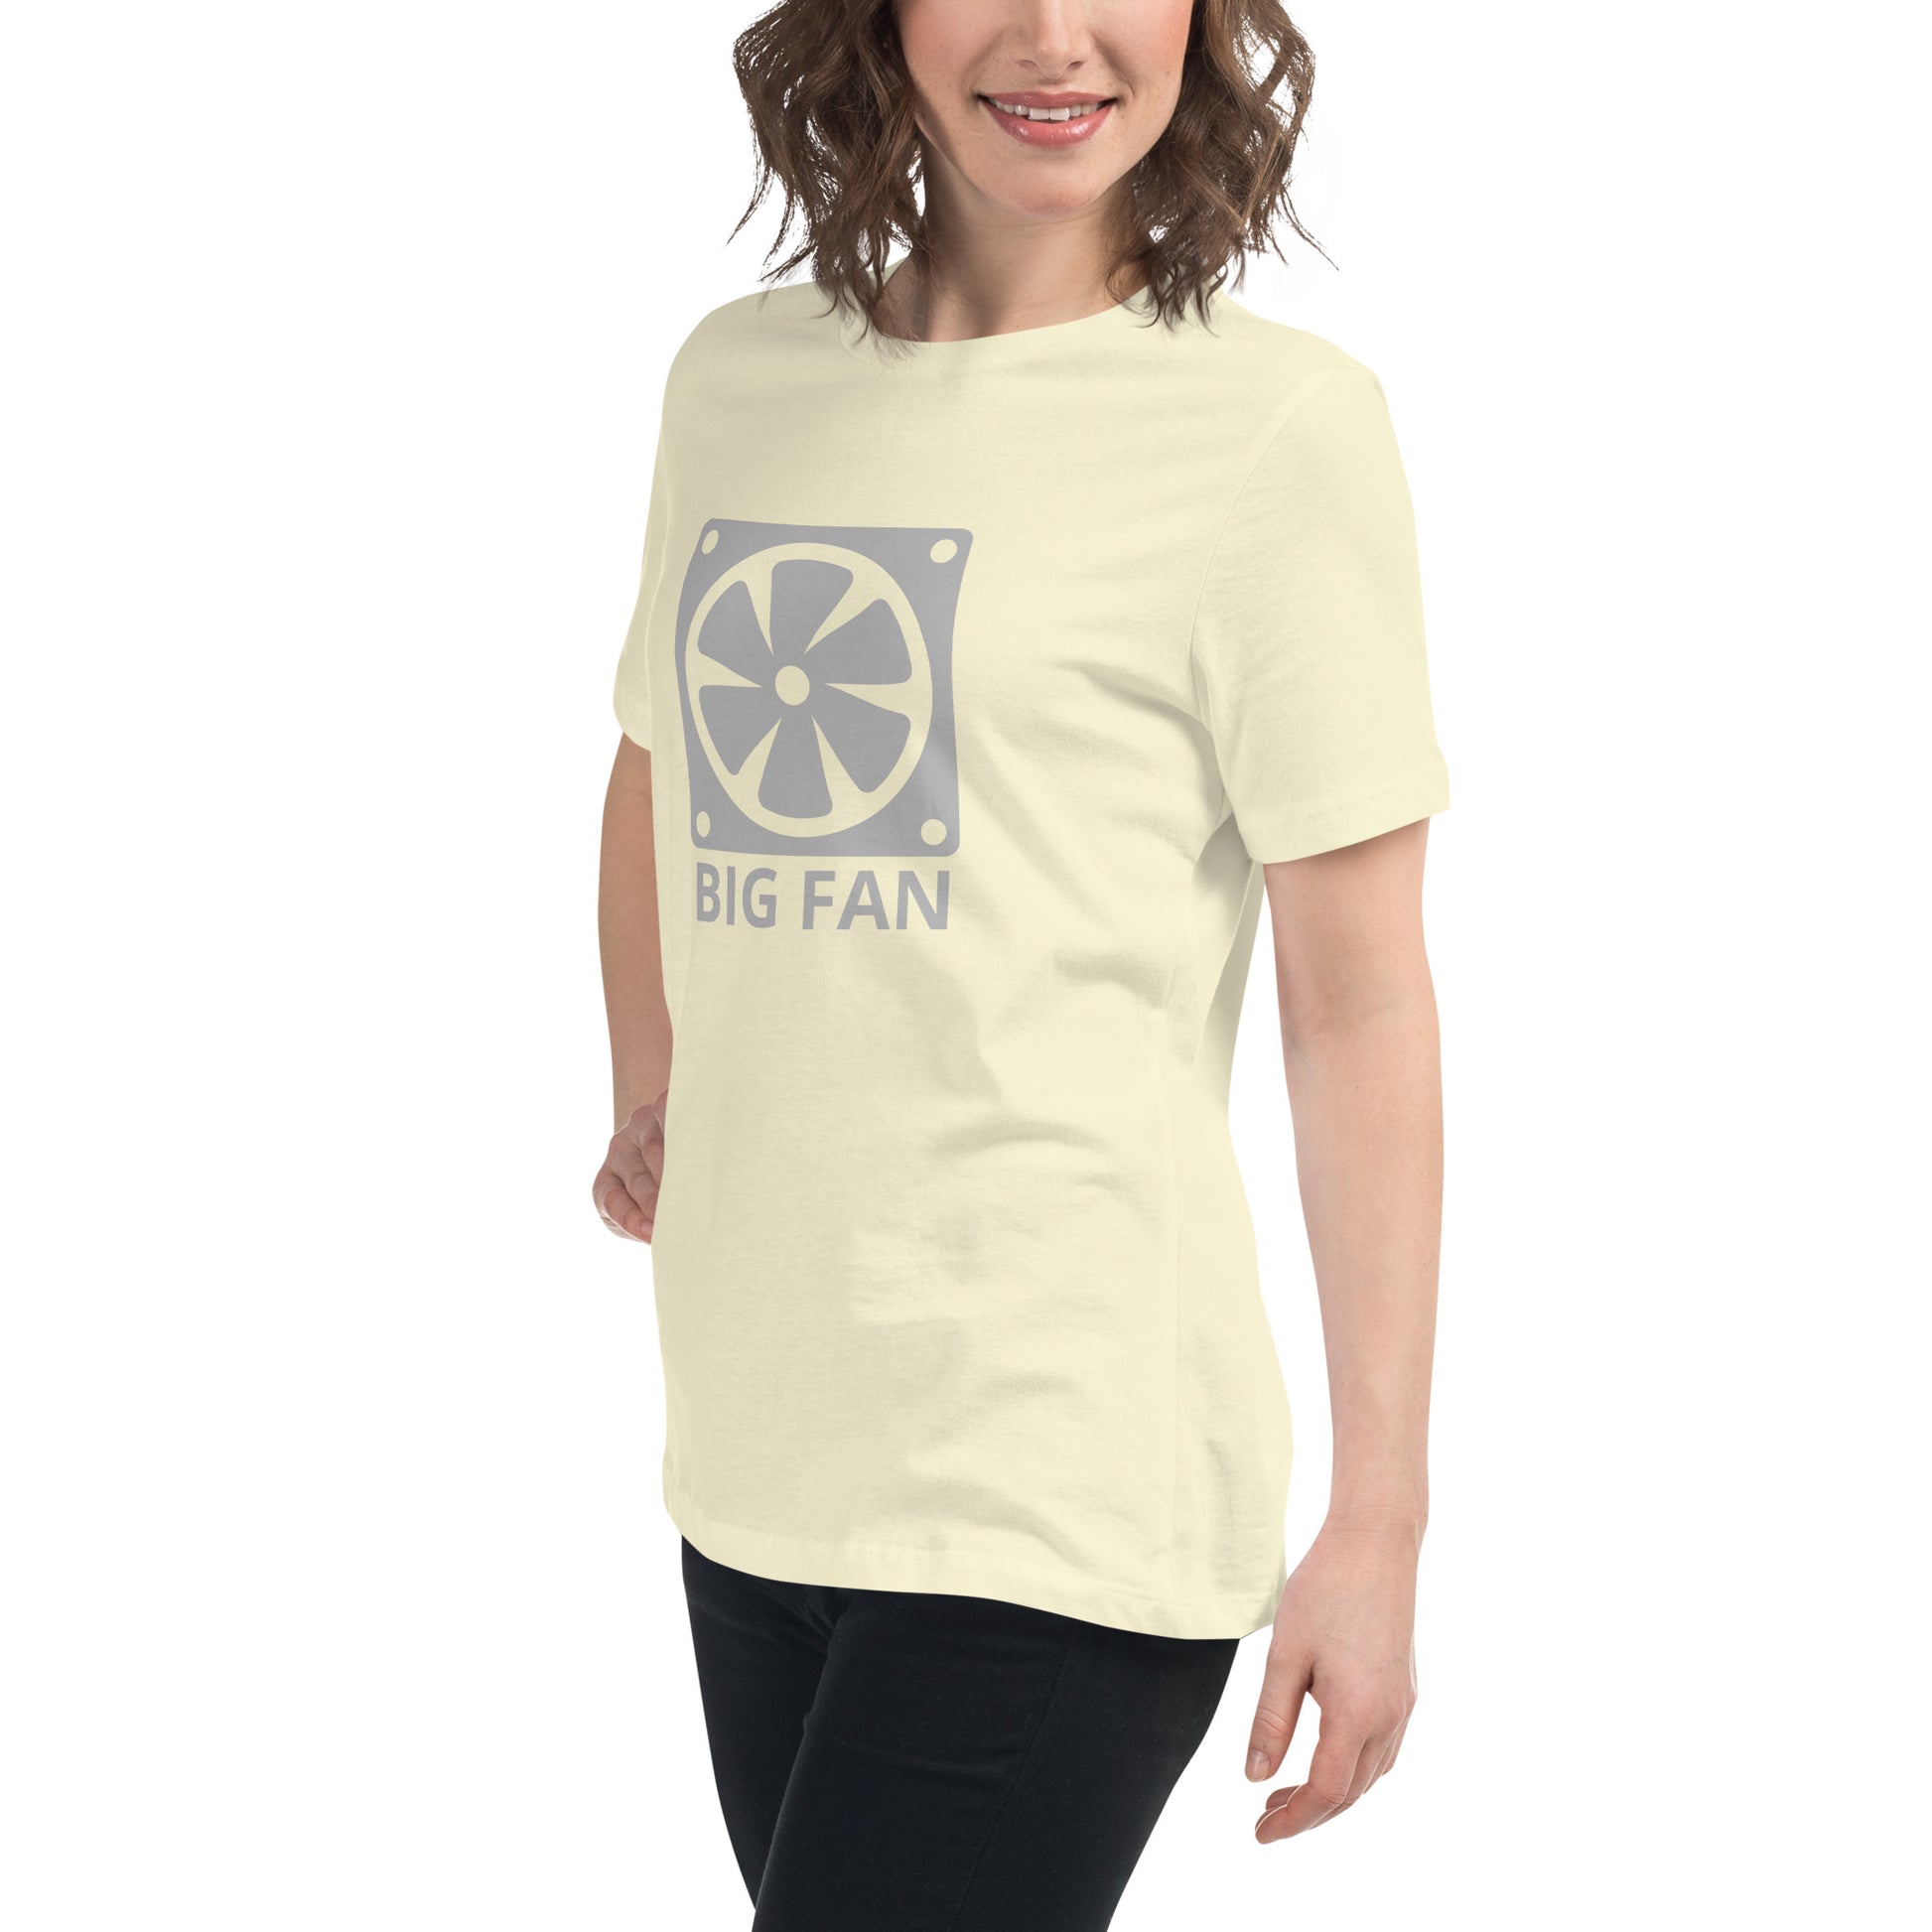 Women with citron t-shirt with image of a big computer fan and the text "BIG FAN"